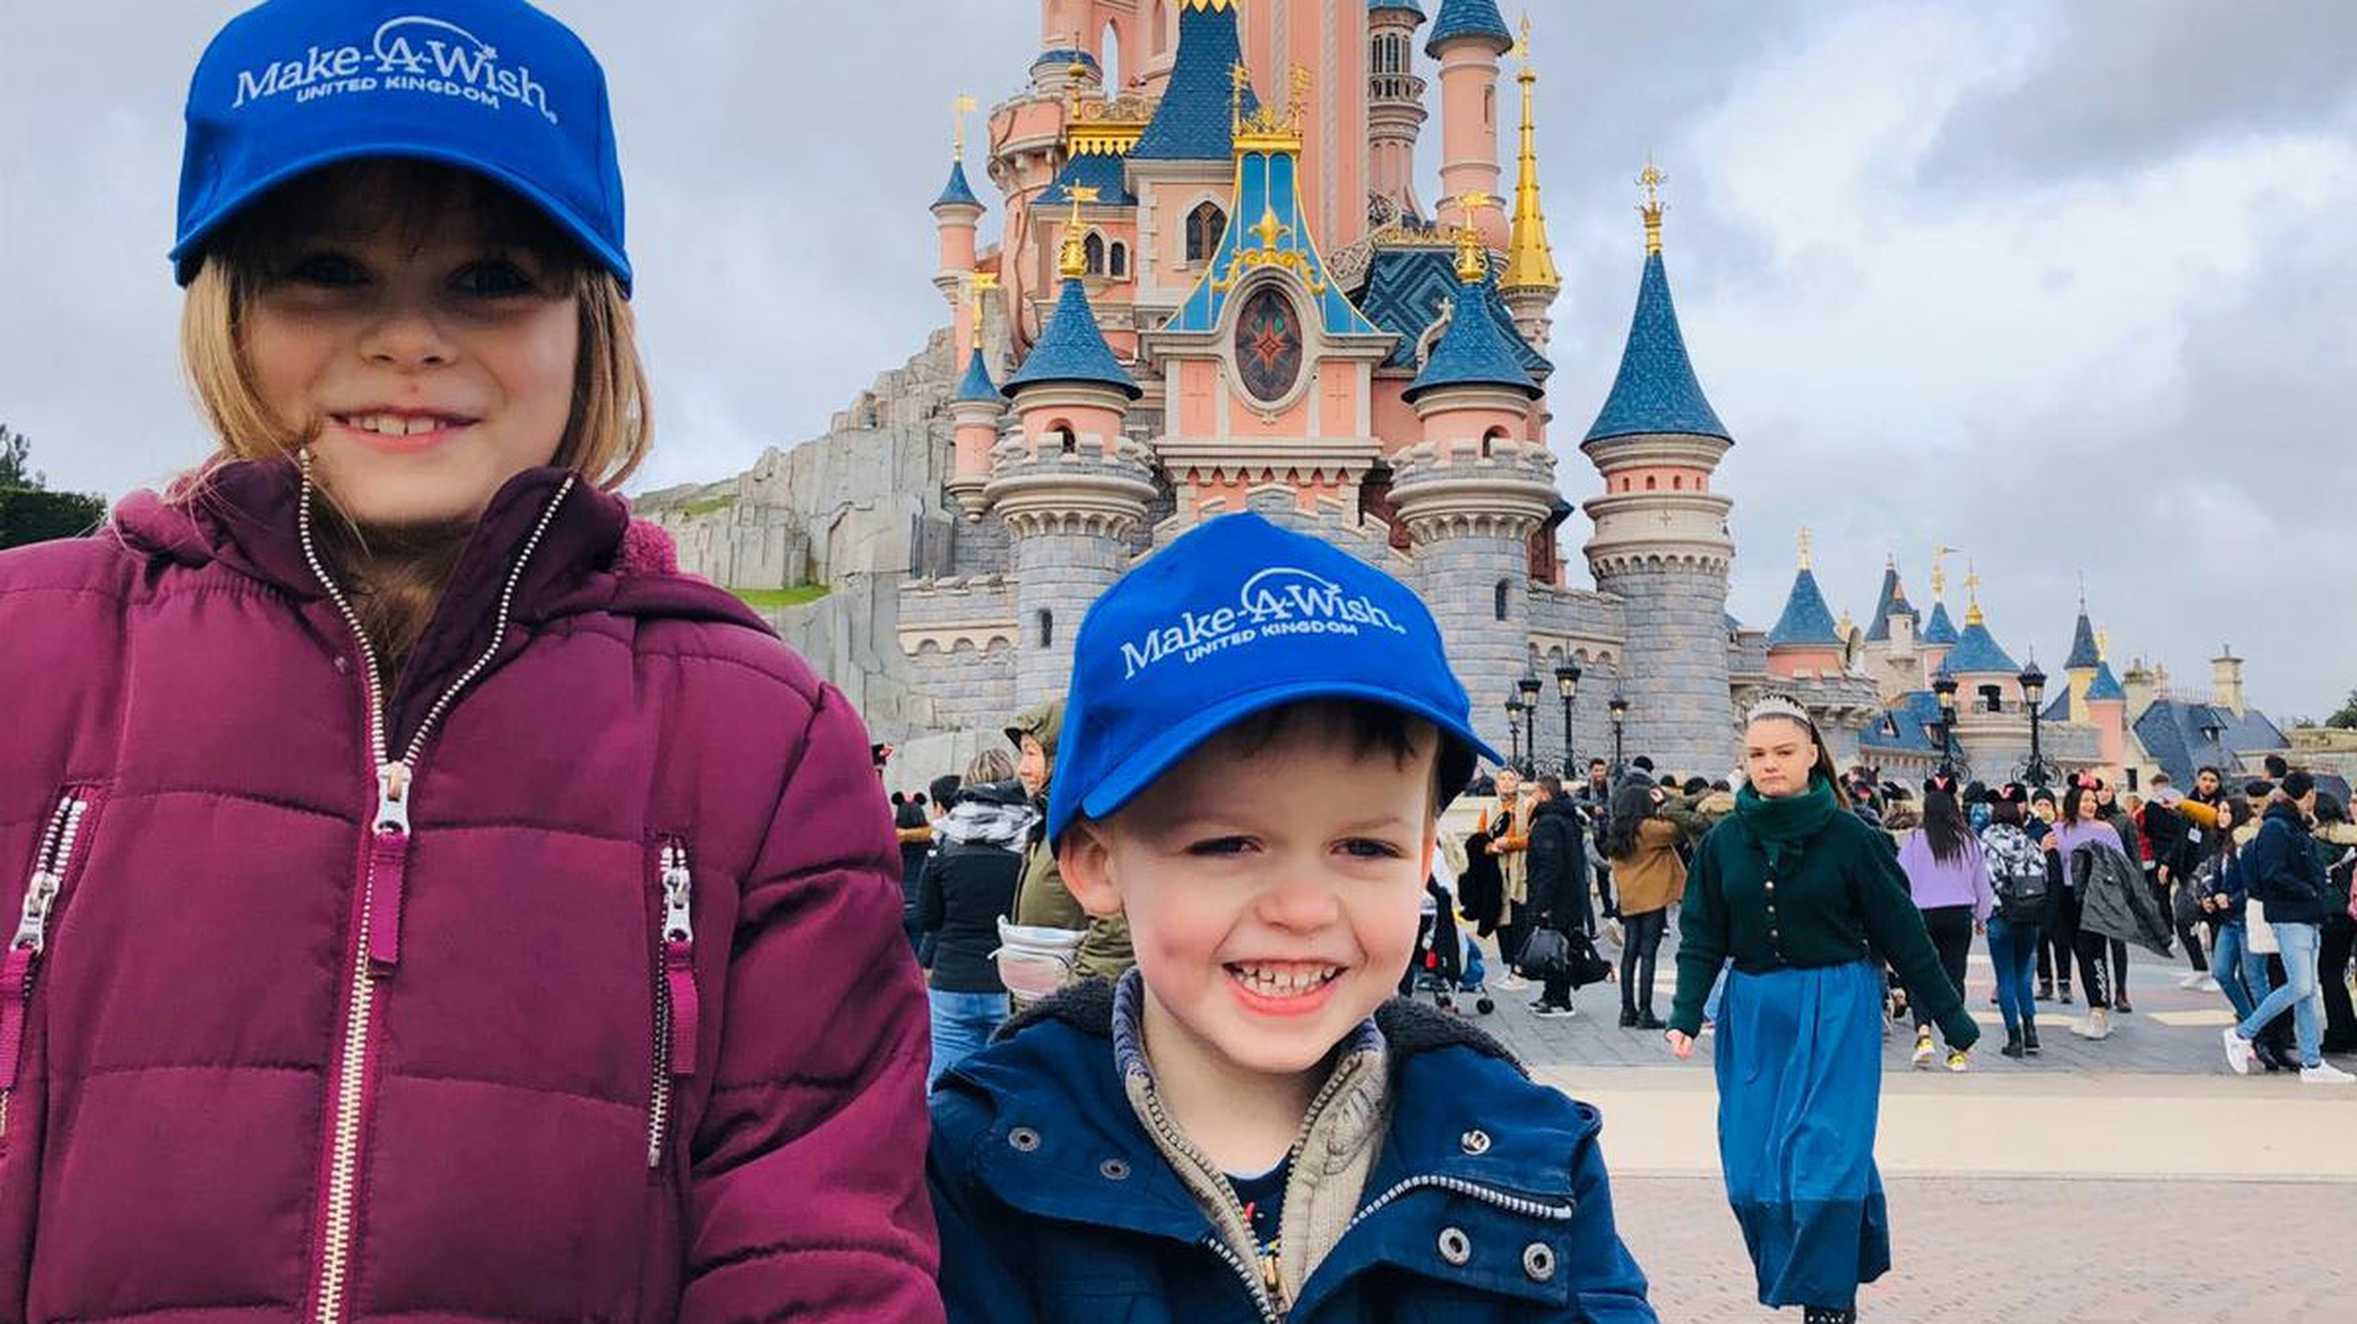 Ezekiel and his sister in front of the magical castle at Disneyland Paris.